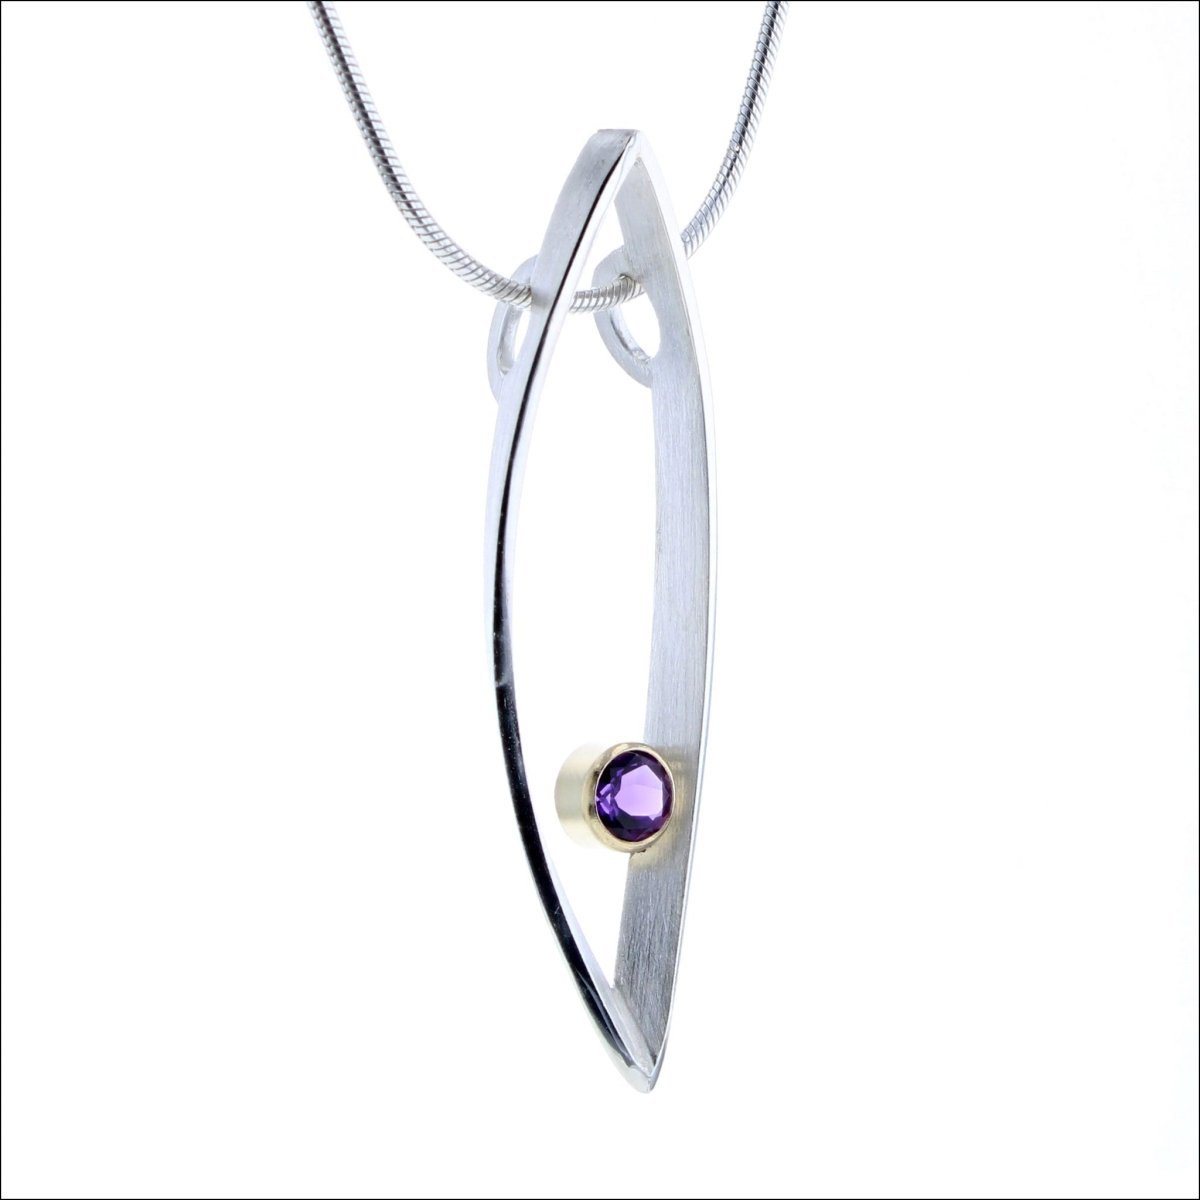 Amethyst Marquise Shaped Pendant Sterling Silver 18KY - JewelsmithPendants